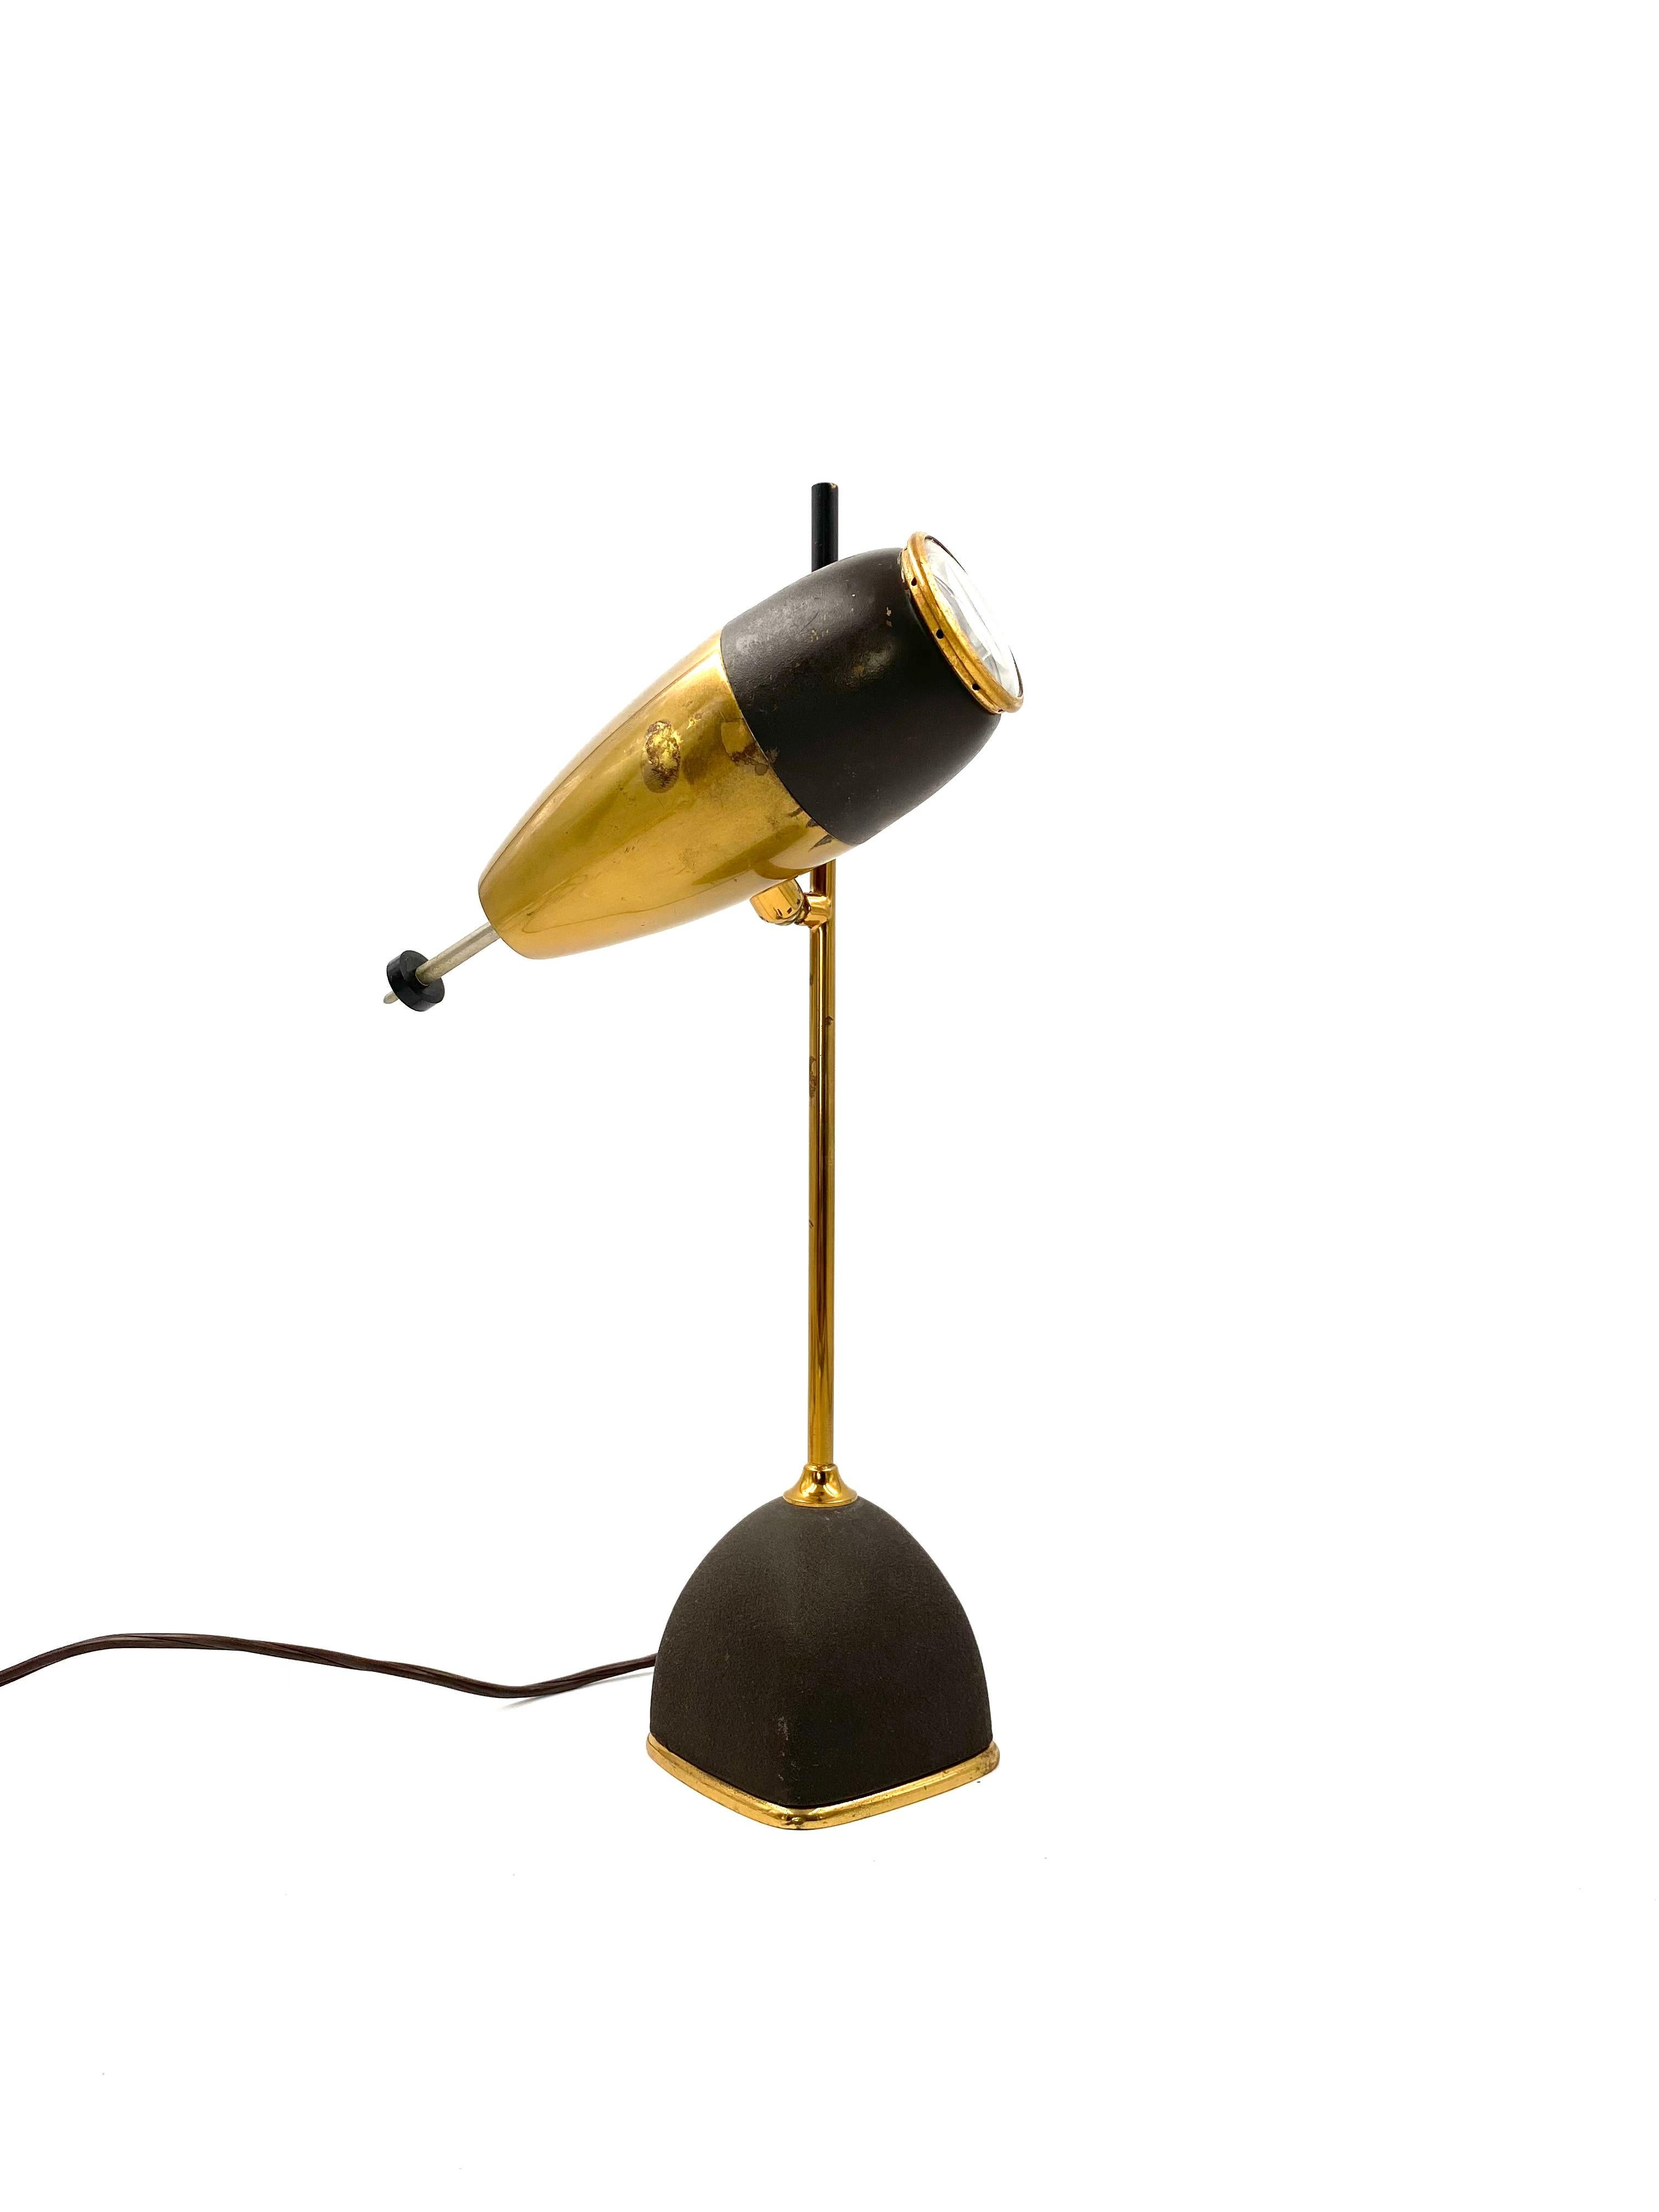 Oscar Torlasco, Mod. 577 Table / Desk Lamp, Lumi Milan, Italy, 1960 In Good Condition For Sale In Firenze, IT